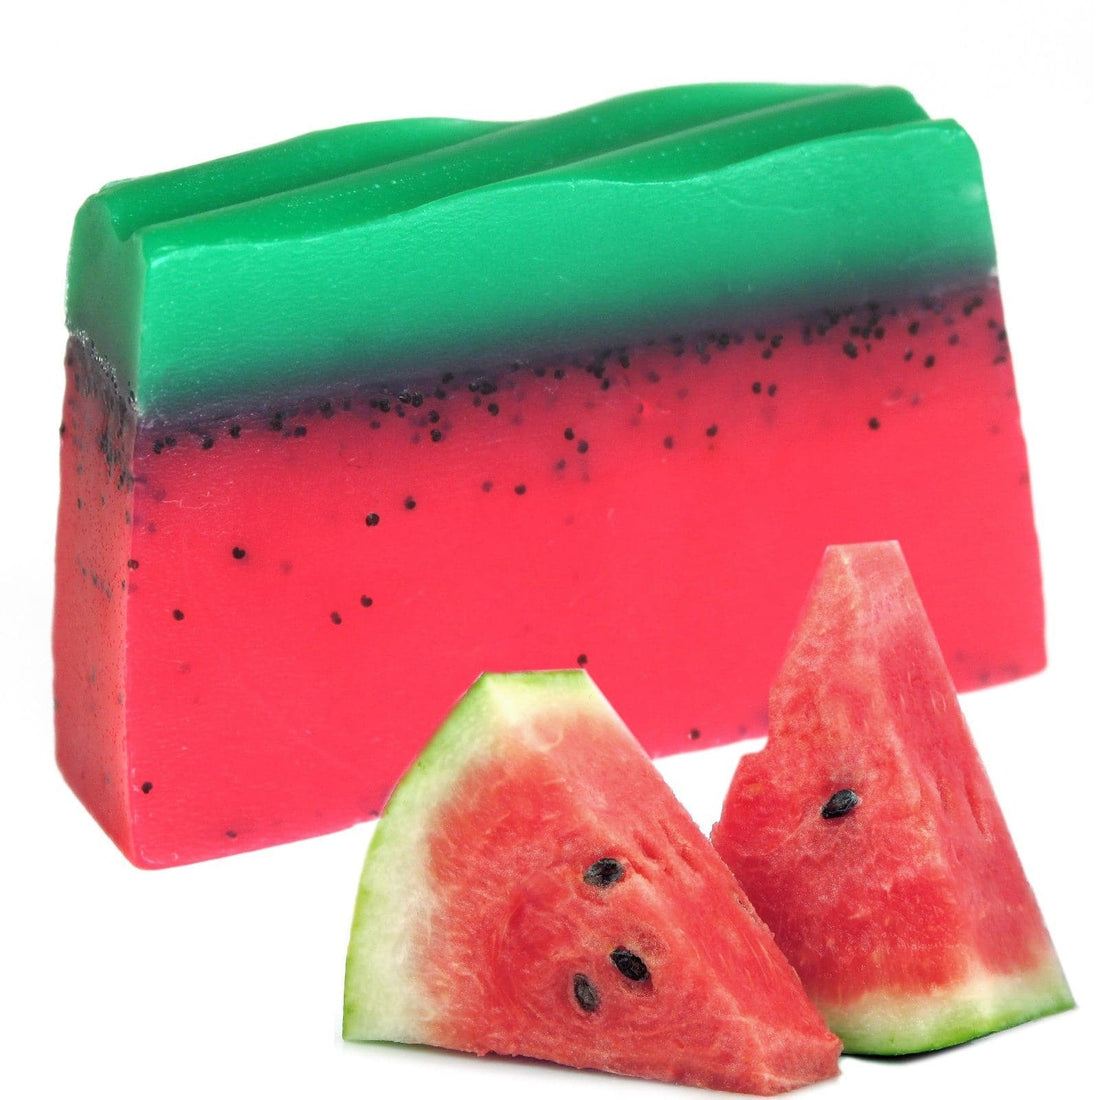 Tropical Paradise Soap Loaf - Watermelon - best price from Maltashopper.com TPSOAP-01